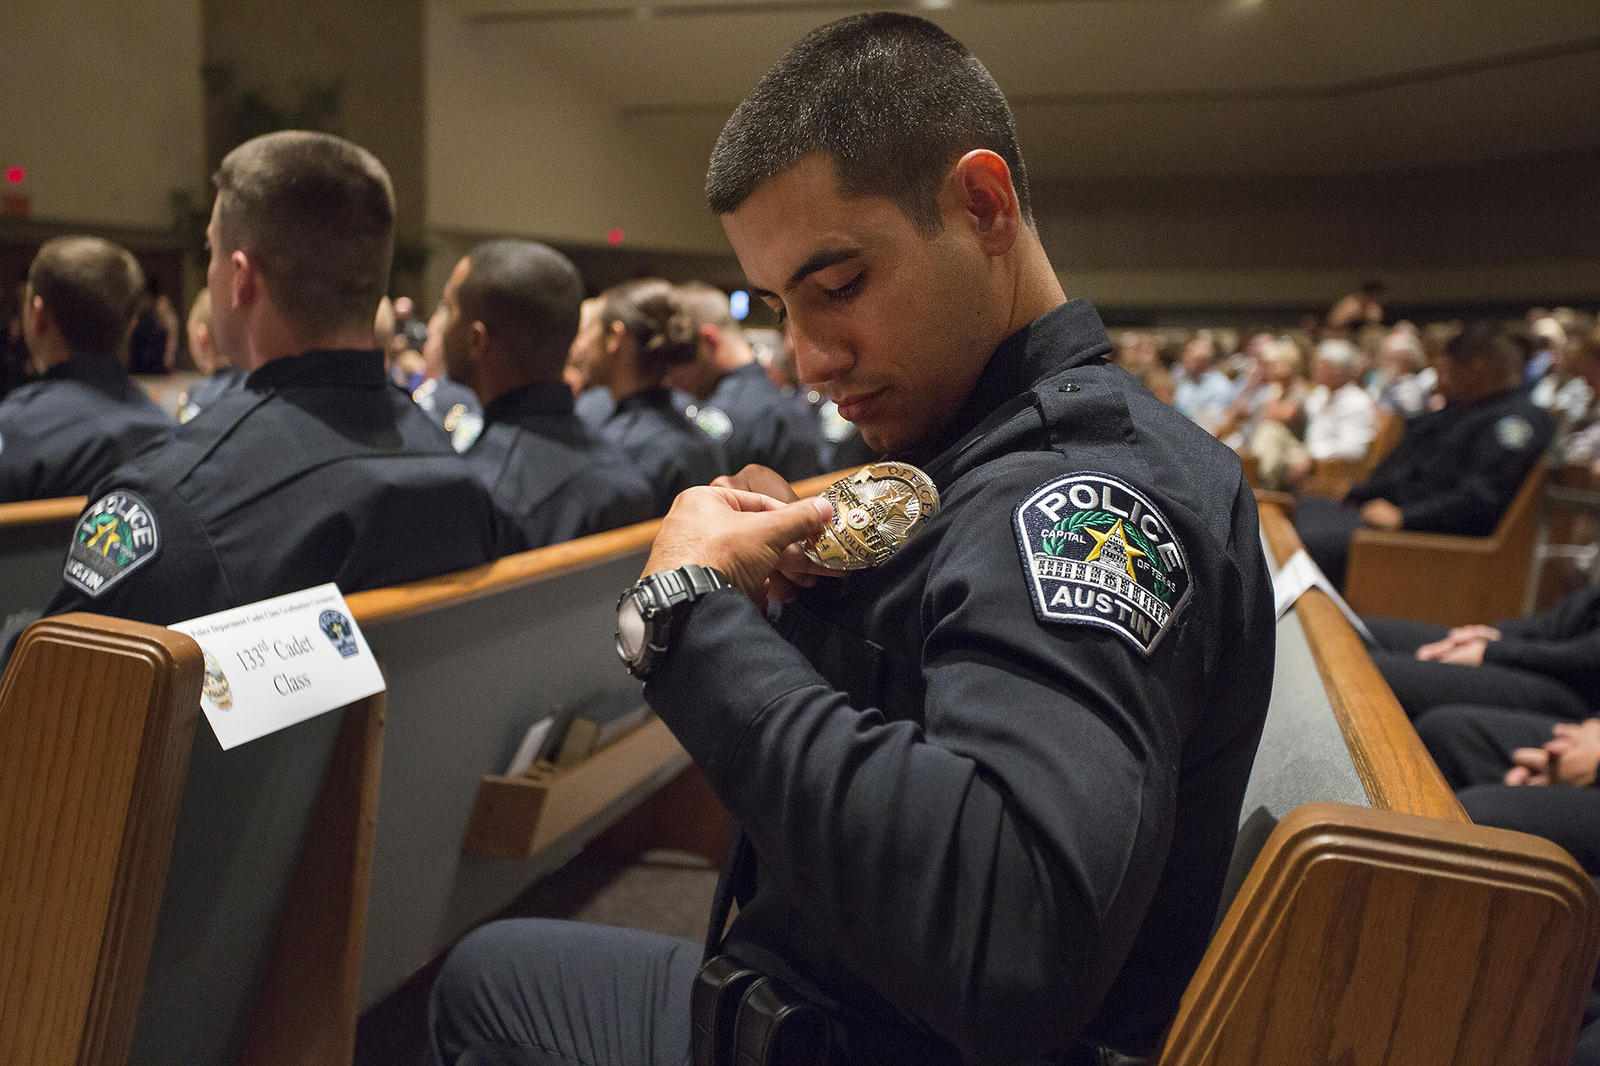 A Day After the Dallas Police Shootings, APD Graduates 37 ...